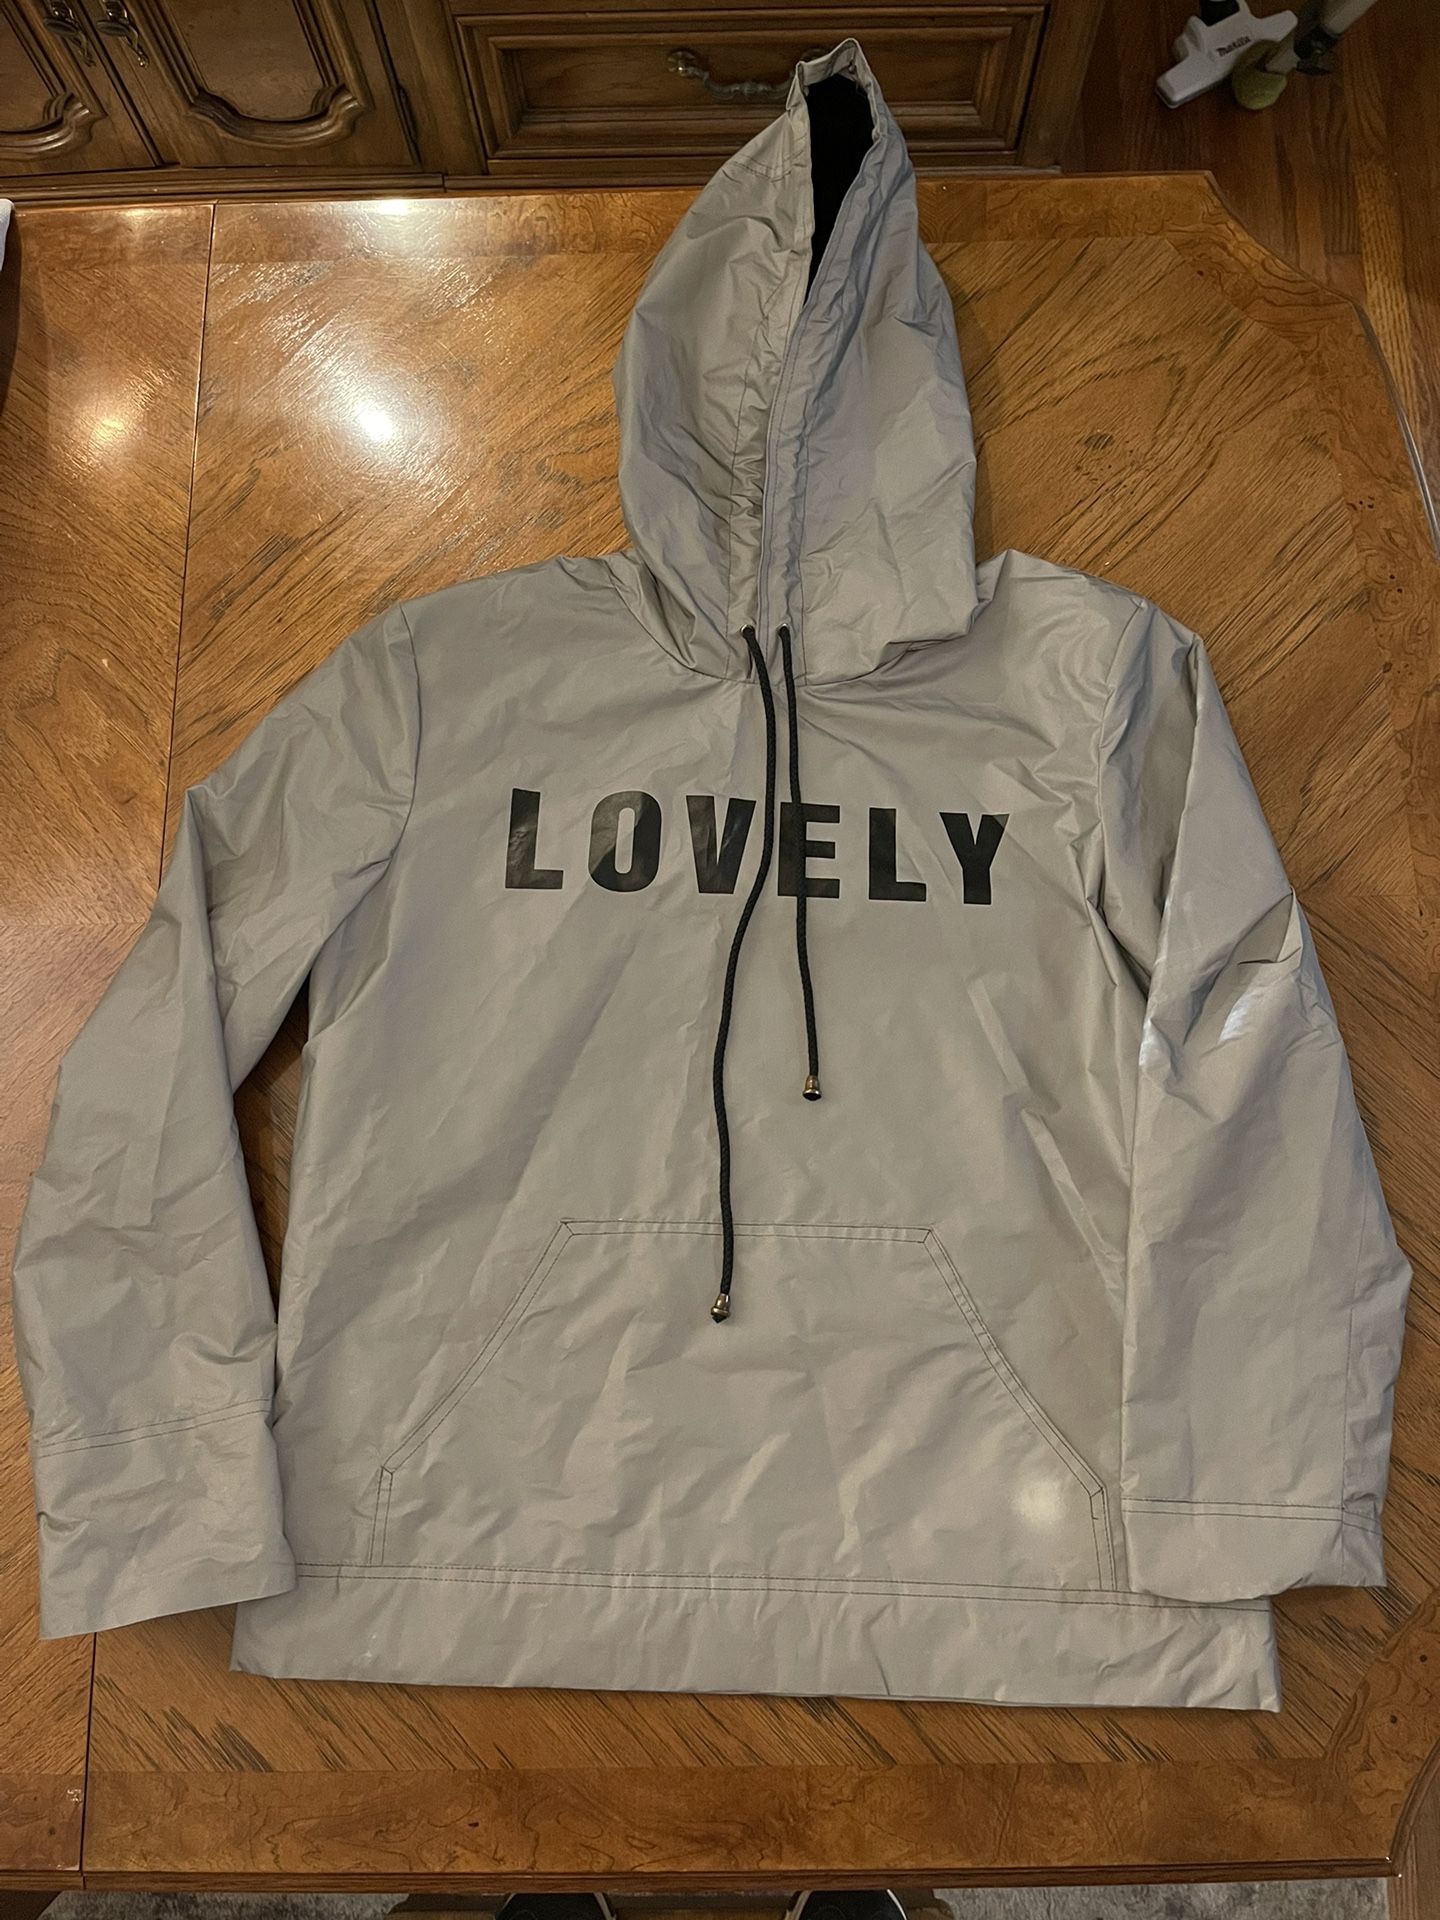 Cool unique J4 “LOVELY” Reflective Hoodie Jacket with Black Print - Size XL